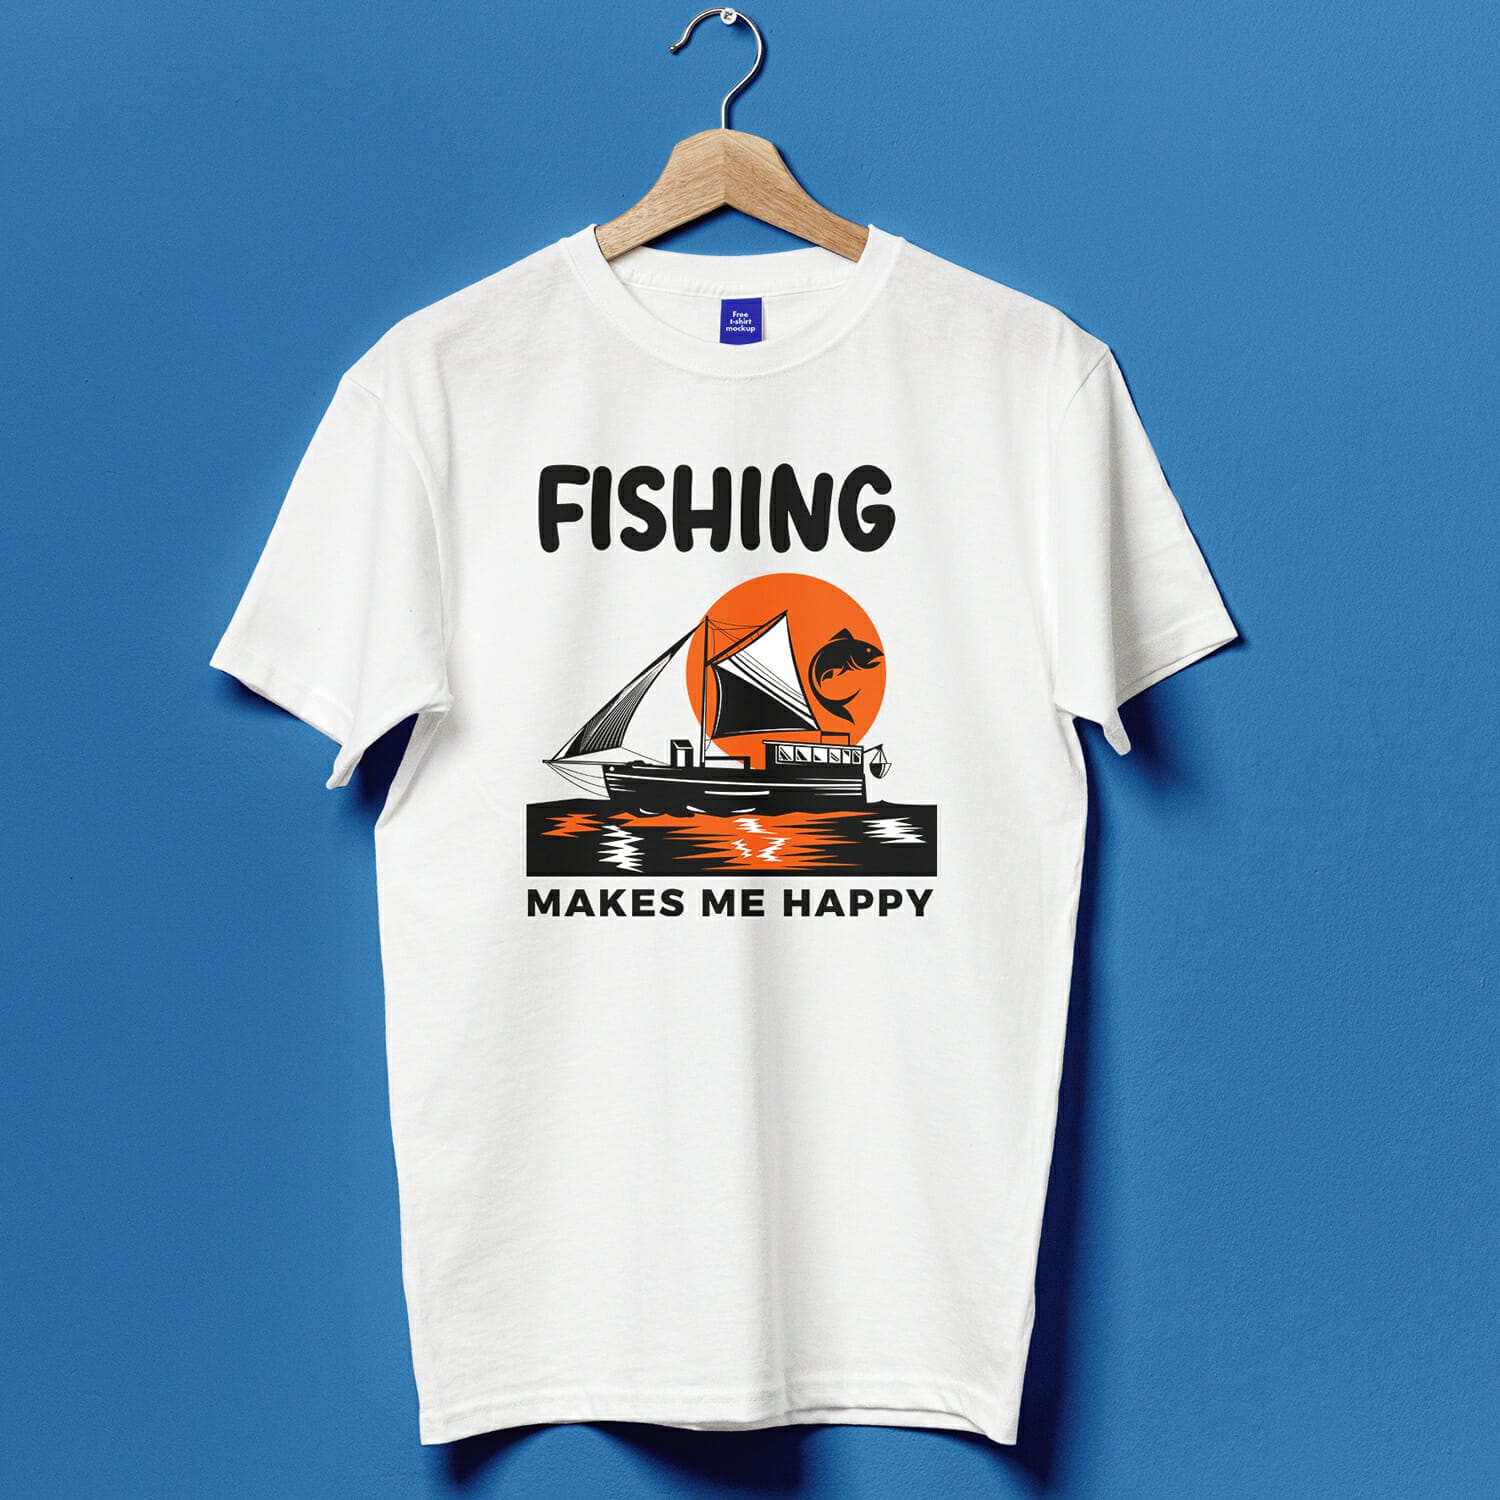 Fishing makes me happy feature img